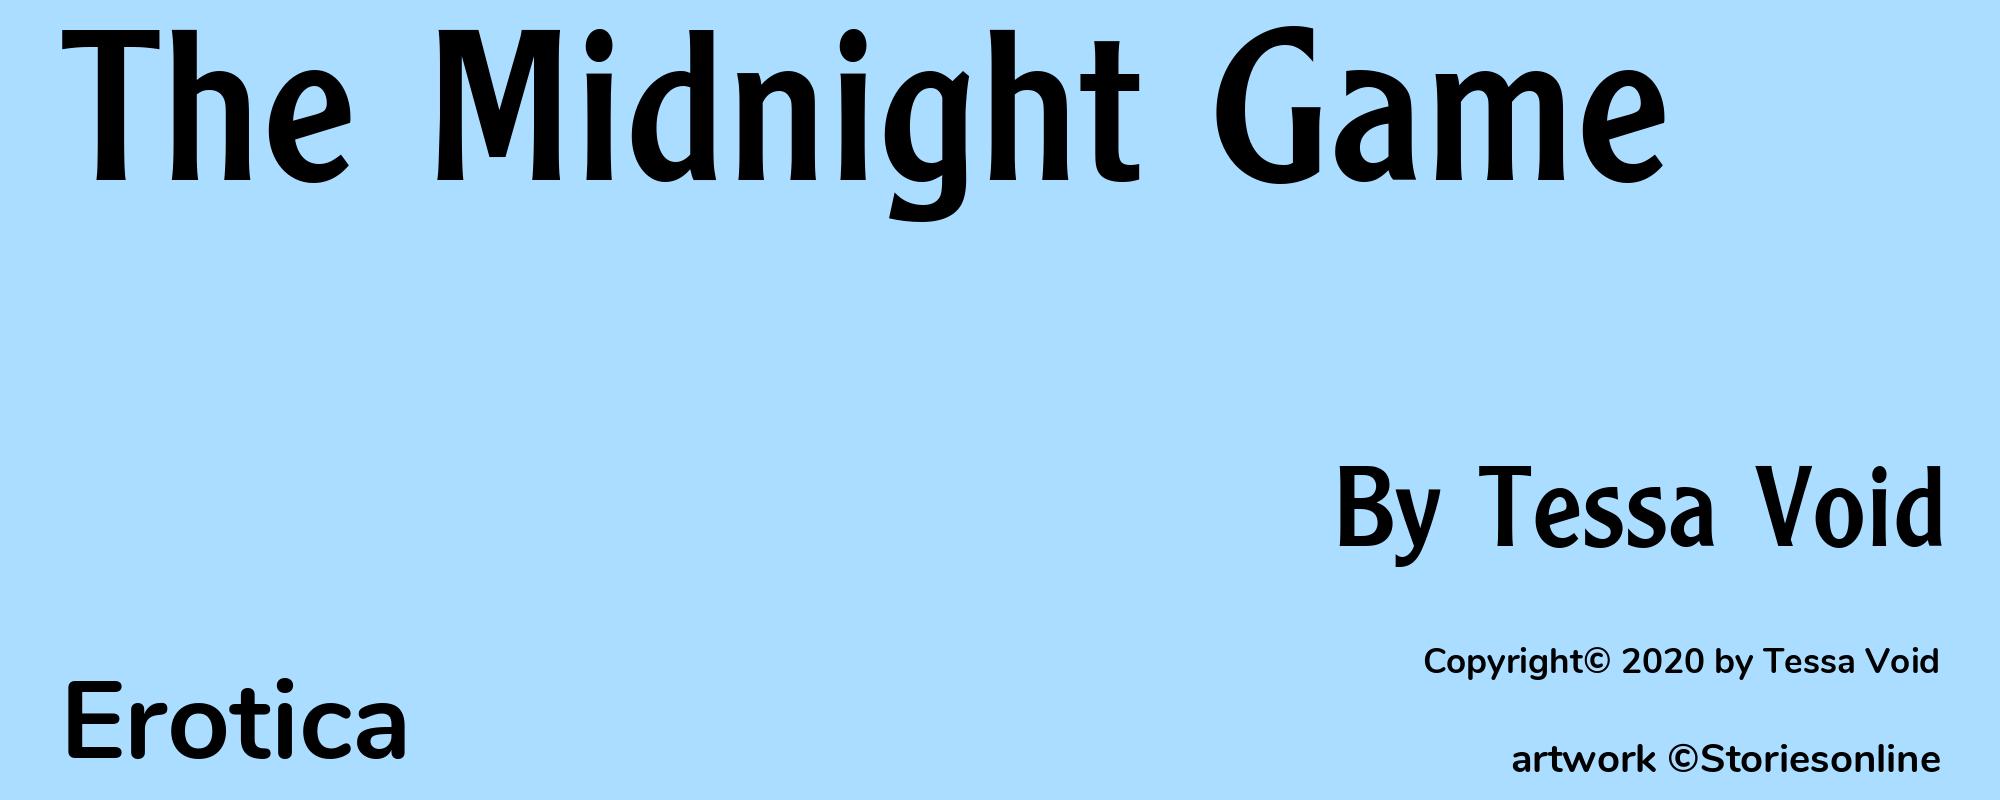 The Midnight Game - Cover